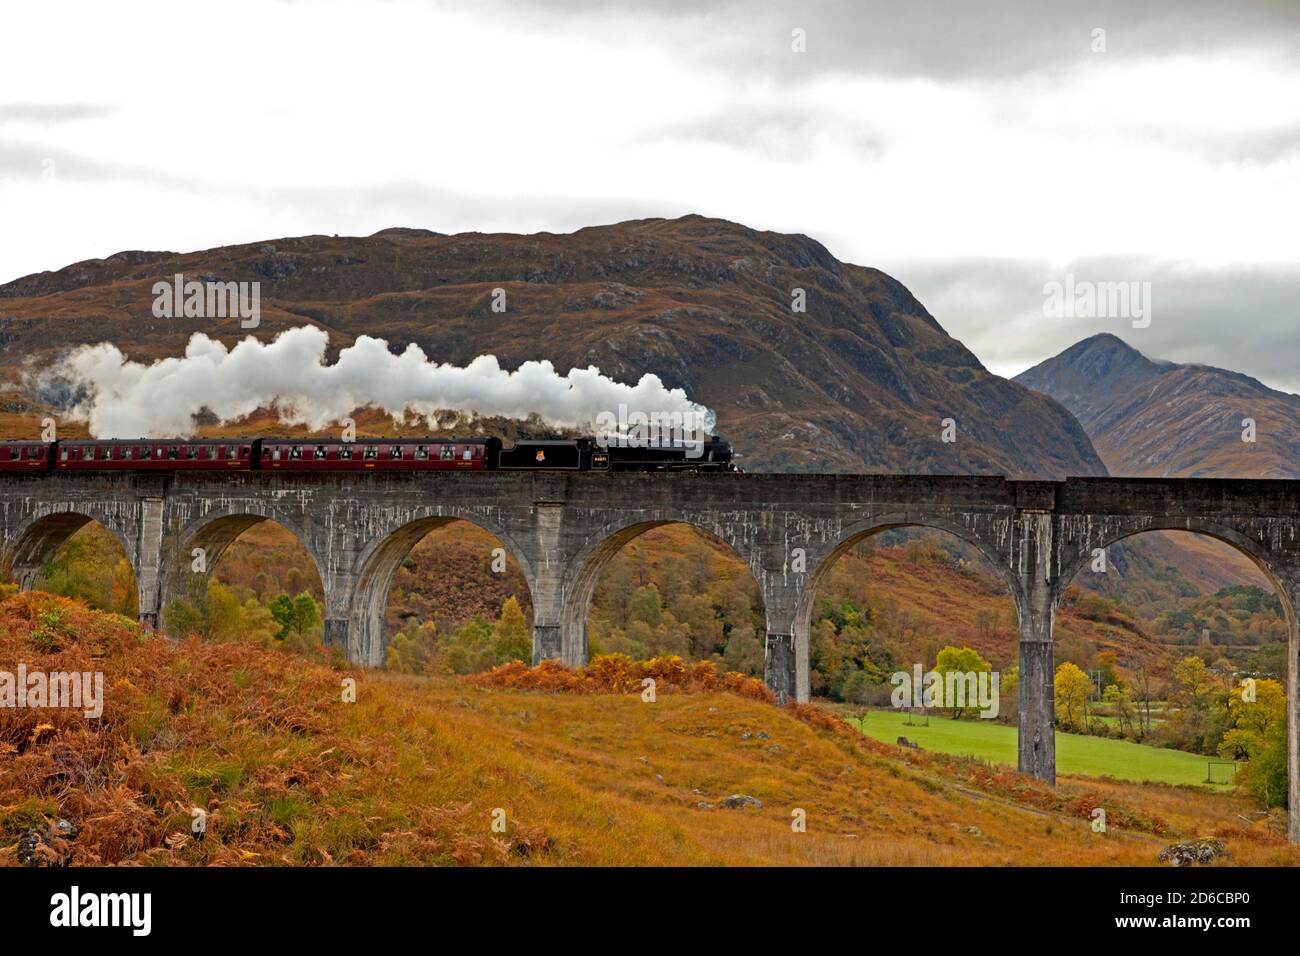 Glenfinnan, Lochaber, Scotland, UK. 16 October 2020. Visitors still flocking to view the Jacobite Steam Train on a cloudy autumn day at the Glenfinnan Viaduct. Construction for a new much needed car park is underway.Credit Scottishcreative/Alamy Live News. Stock Photo